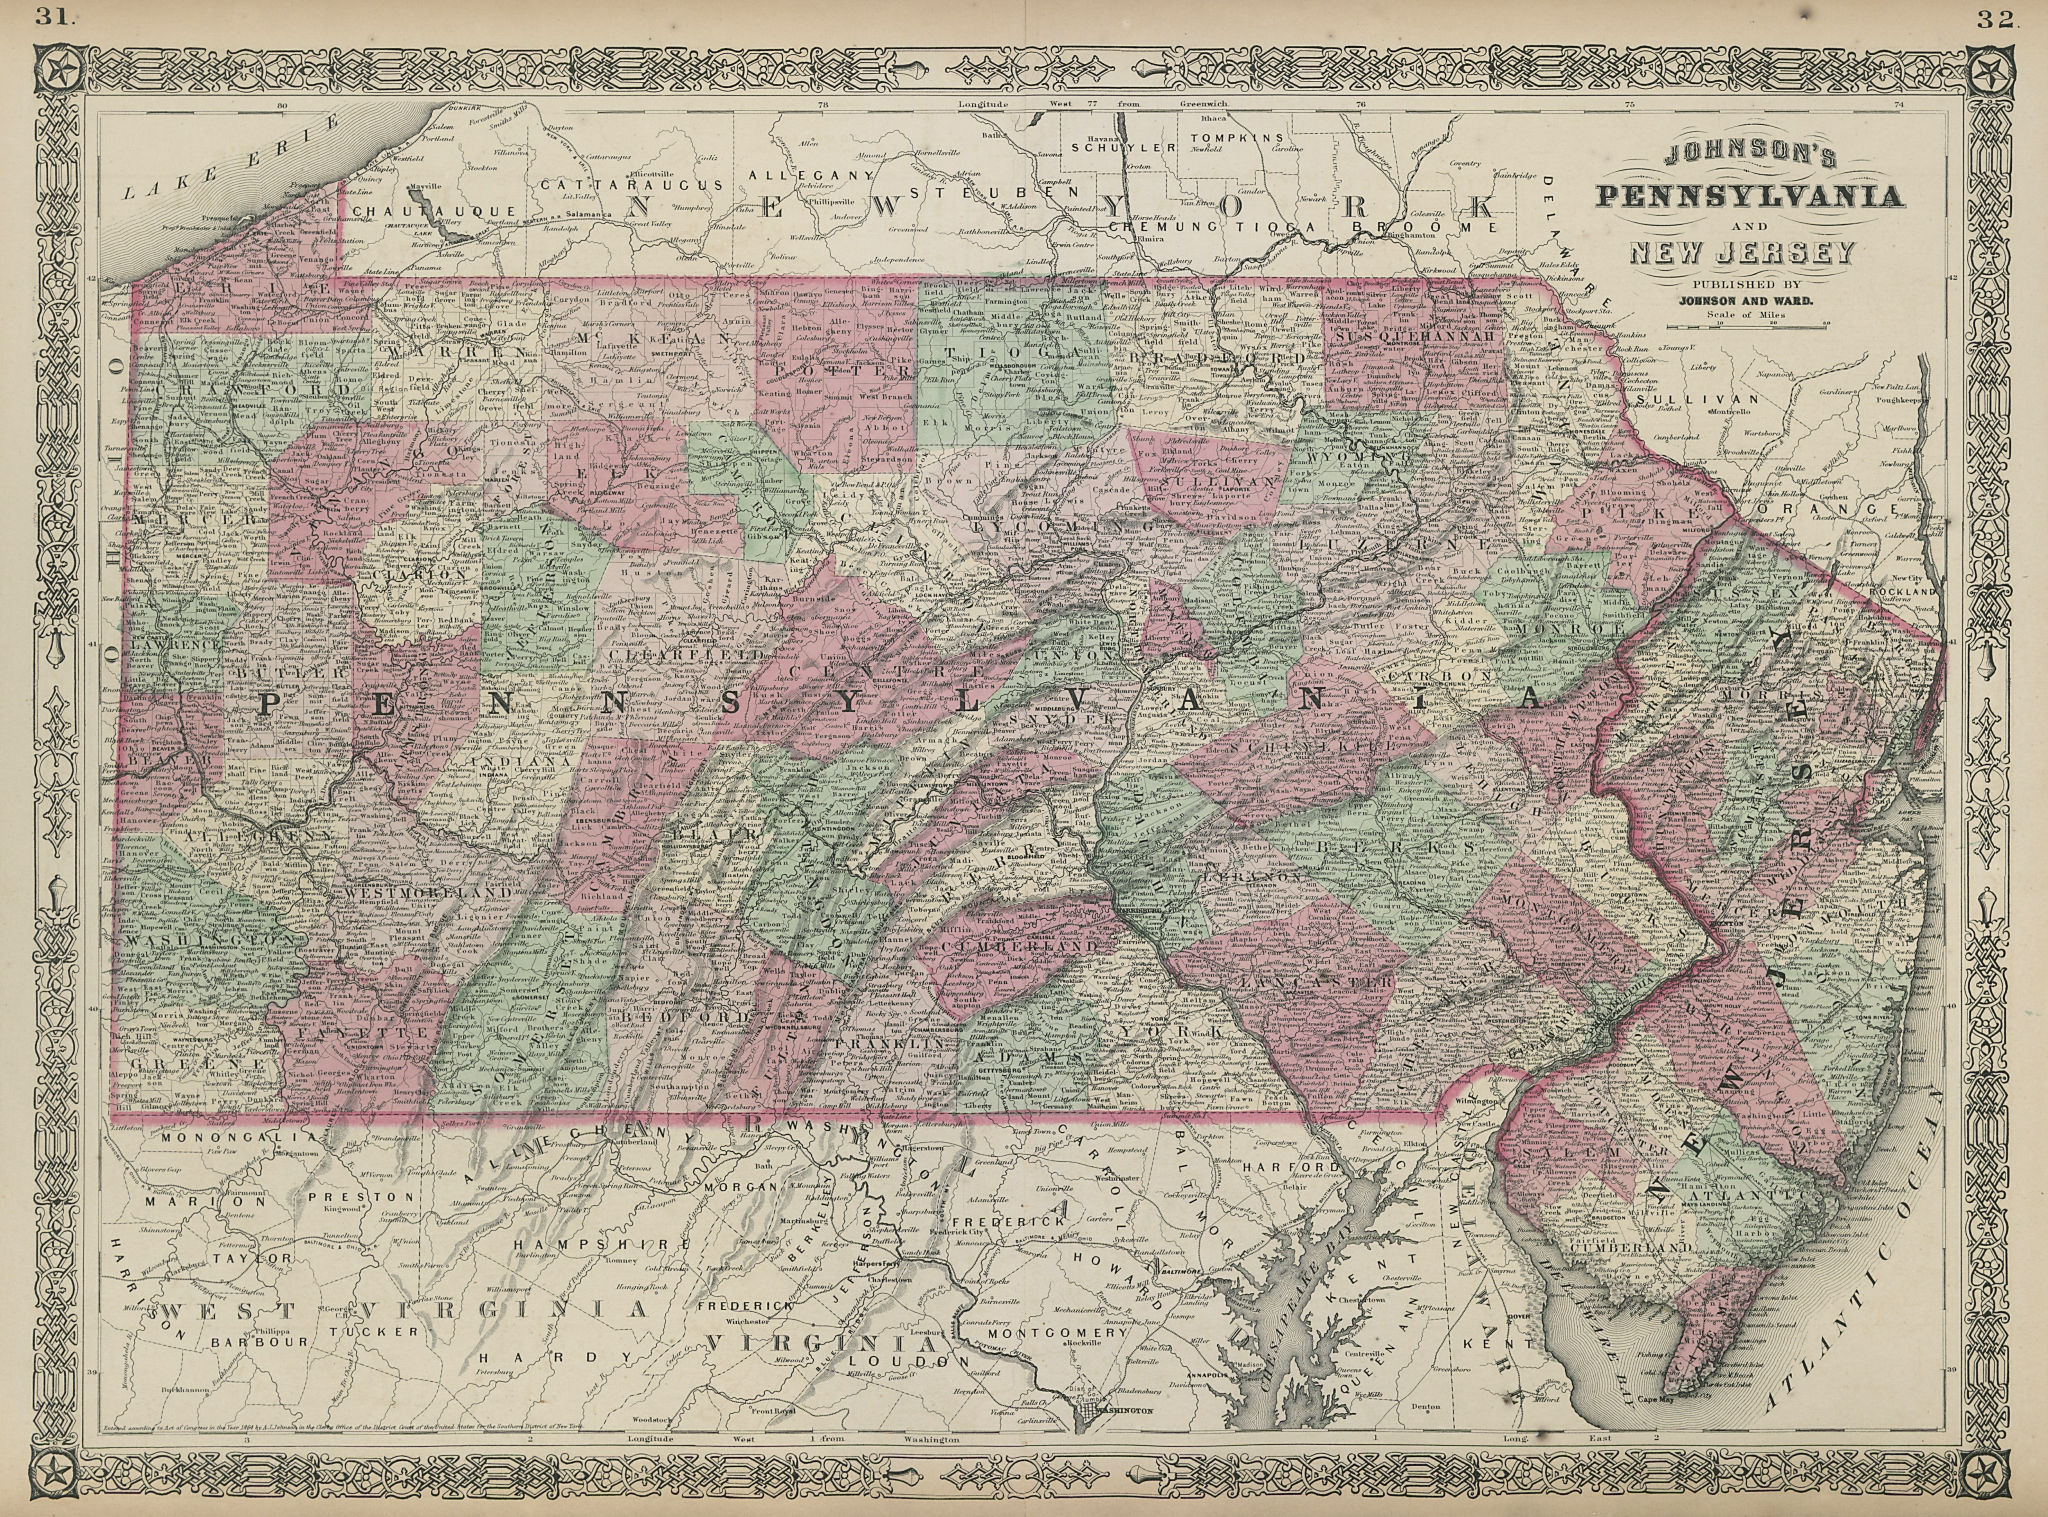 Associate Product Johnson's Pennsylvania and New Jersey. US state map showing counties 1865